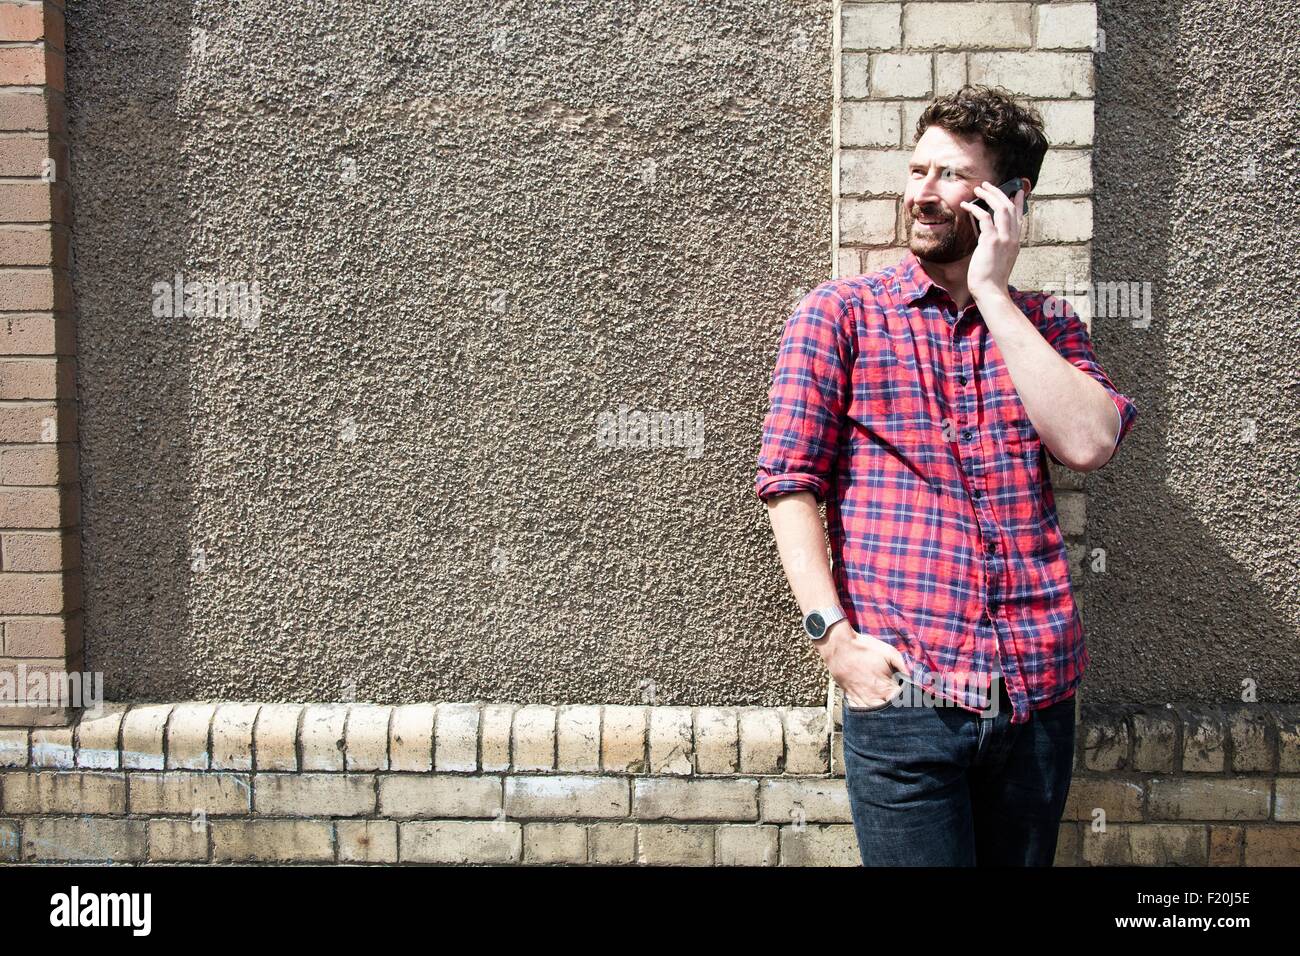 Young man leaning against wall chatting on smartphone Banque D'Images